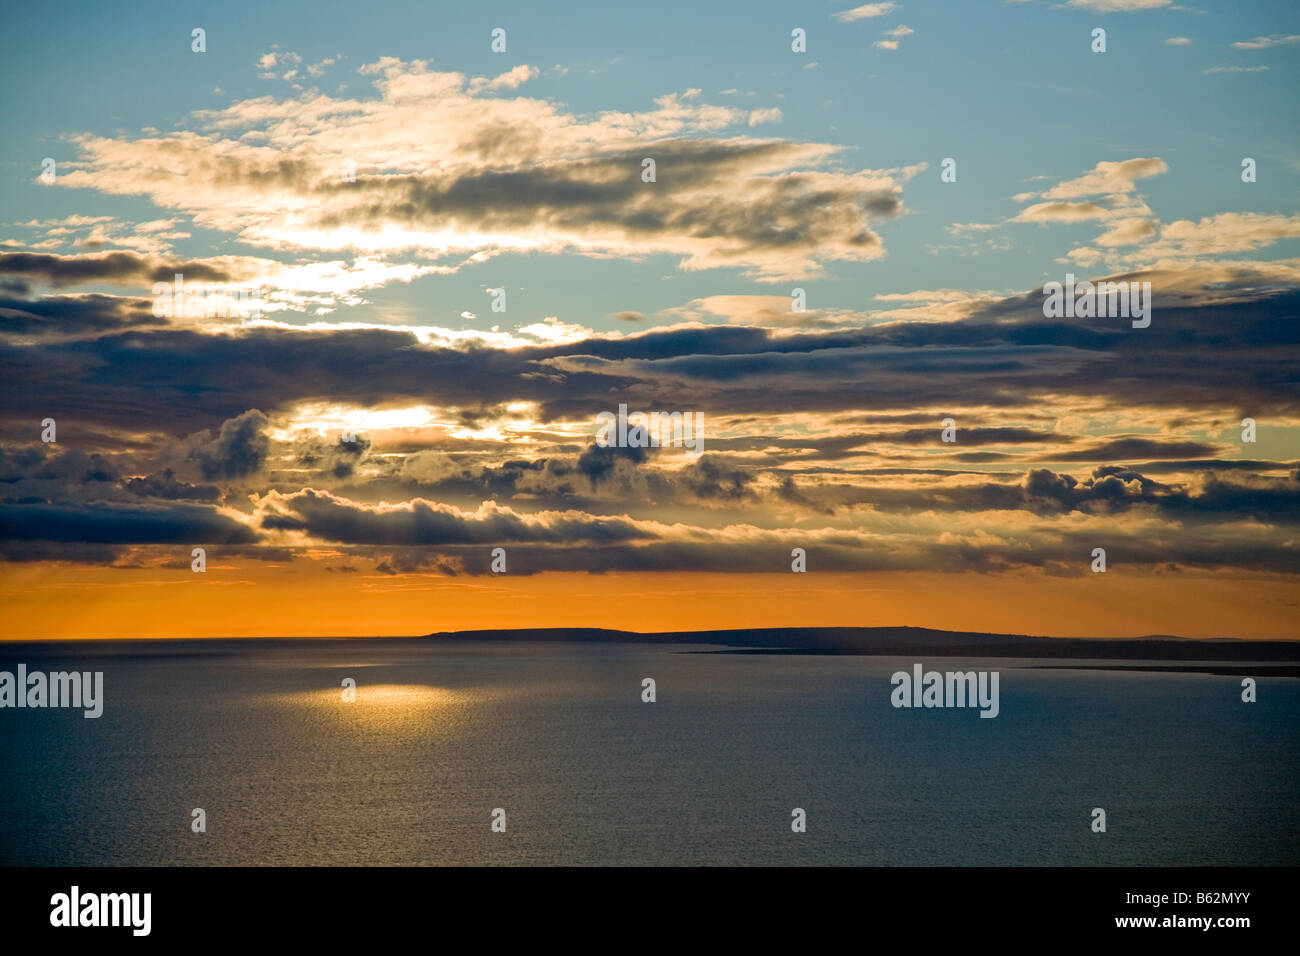 Sunset over the Atlantic Ocean from the coast of County Clare, Ireland. Stock Photo